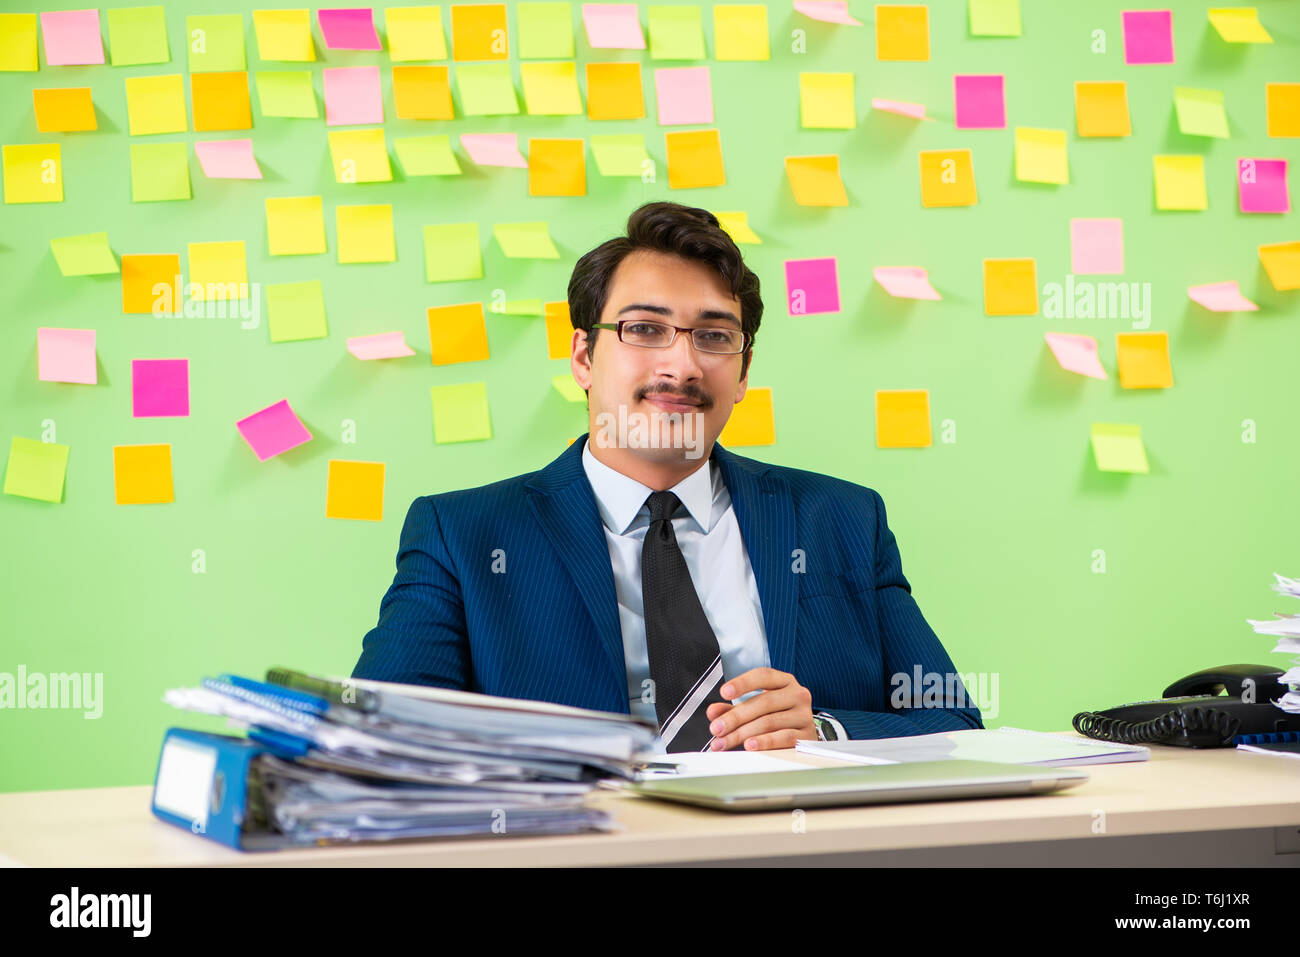 Businessman having trouble with his priorities Stock Photo